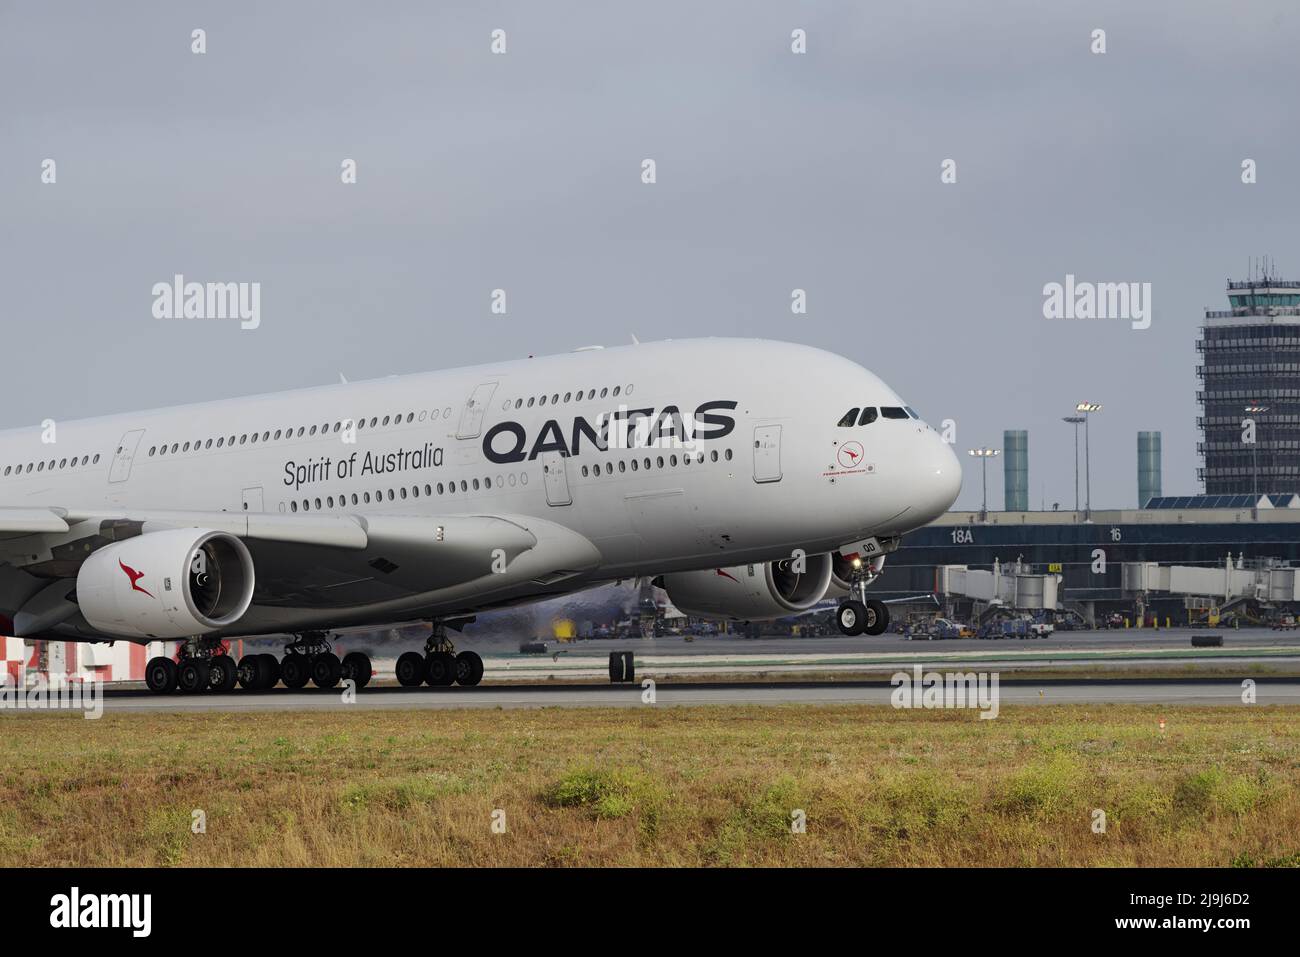 Qantas Airbus A380-842 with registration VH-OQD shown touching down at Los Angeles International Airport, LAX. Stock Photo